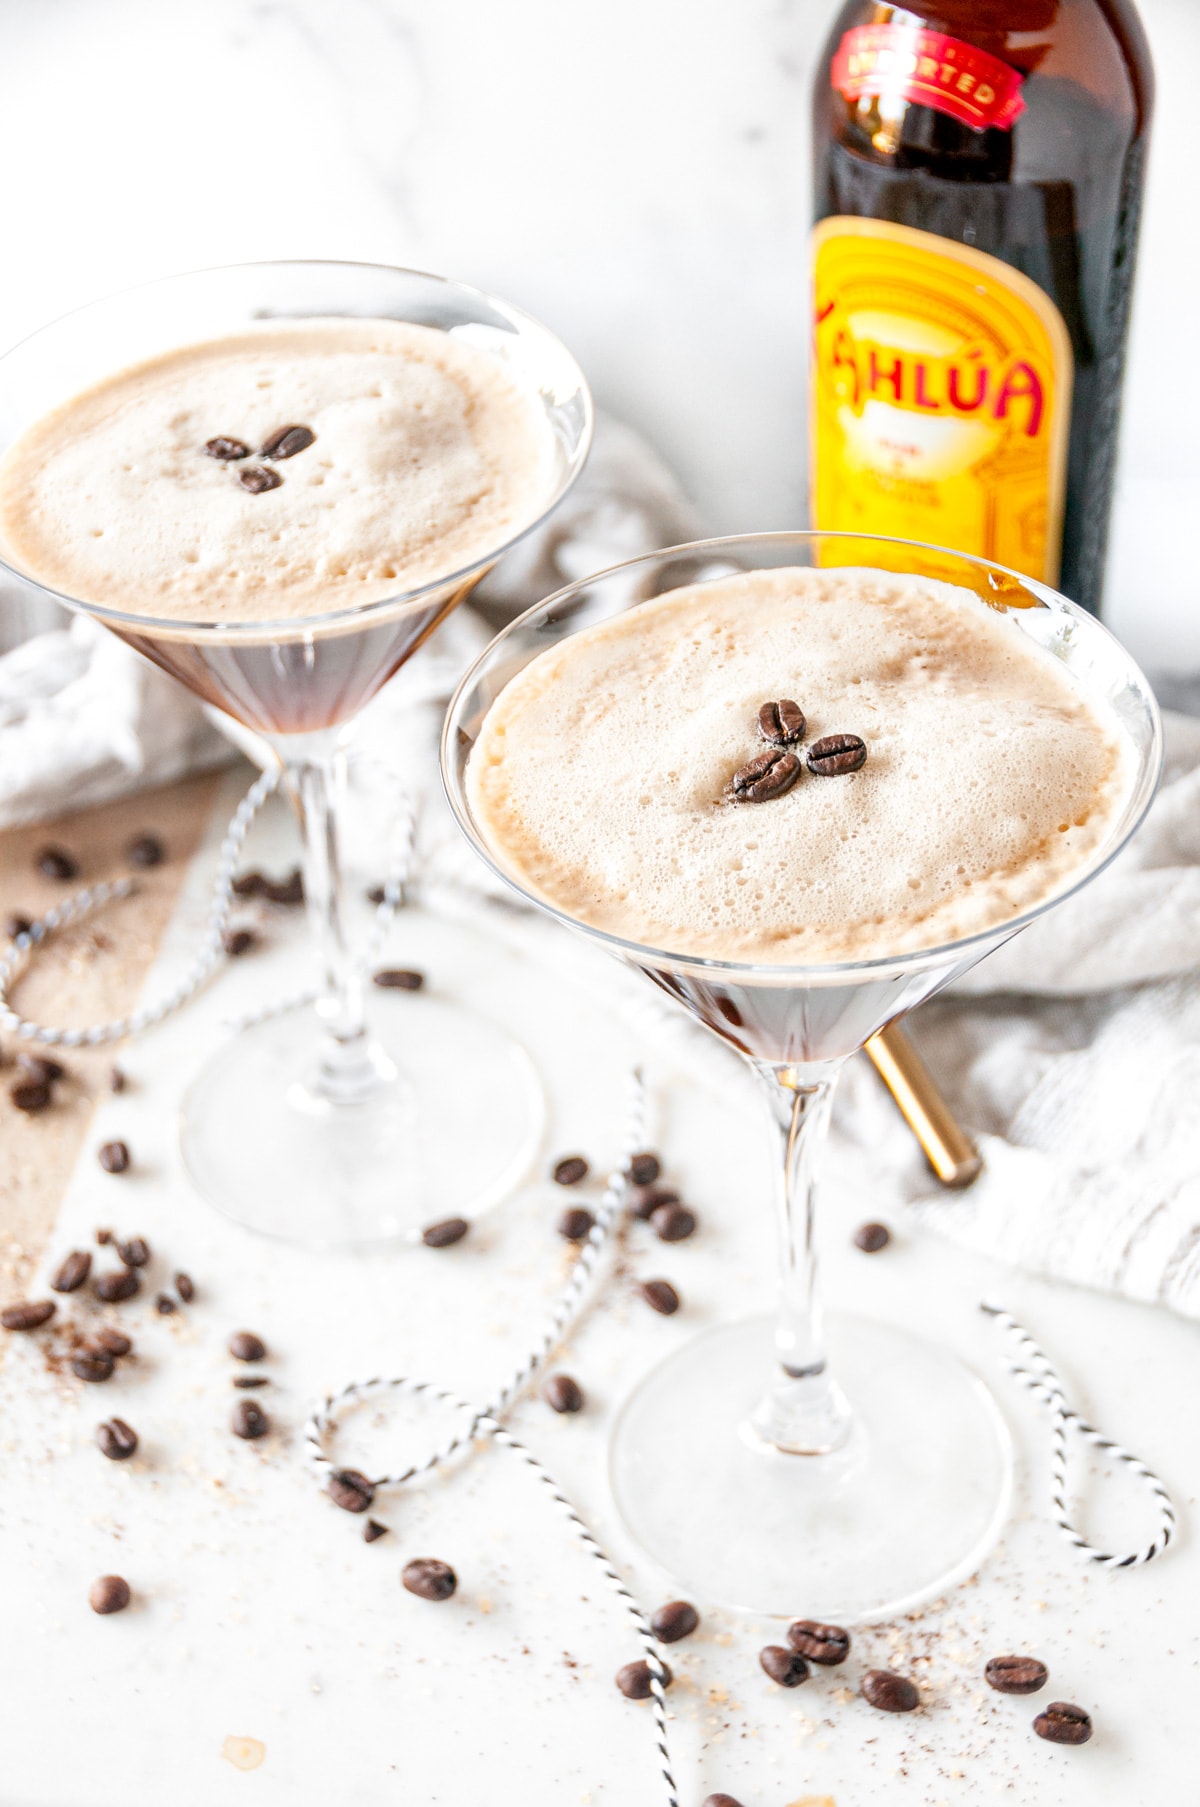 Espresso martini cocktail with foam and three coffee beans in glasses with kahlua bottle in the background